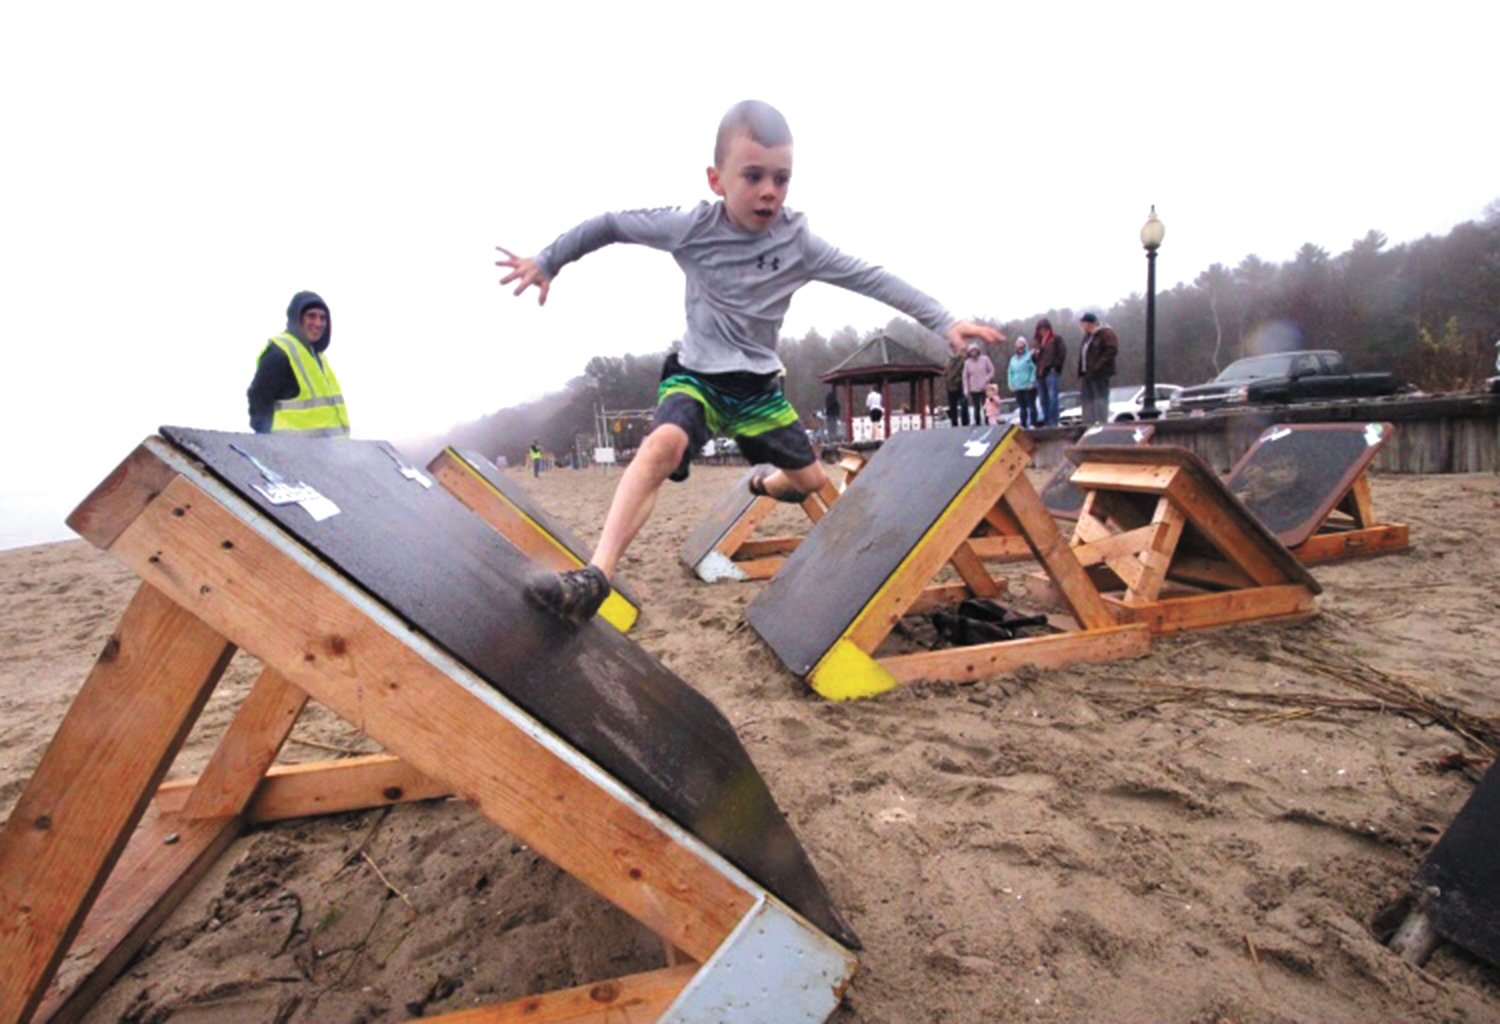 LEADING UP TO A DIP: Eight-year-old Warwick resident Luke McGowan traverses the Bounding Clam obstacle at the 2022 Frozen Clam Dip Obstaplunge. Luke gets a lot of practice at his dad’s gym Laid-back Fitness. He says the Obstaplunge is the best one around because, “it lasts longer and is a way more fun experience.” (Submitted photo)